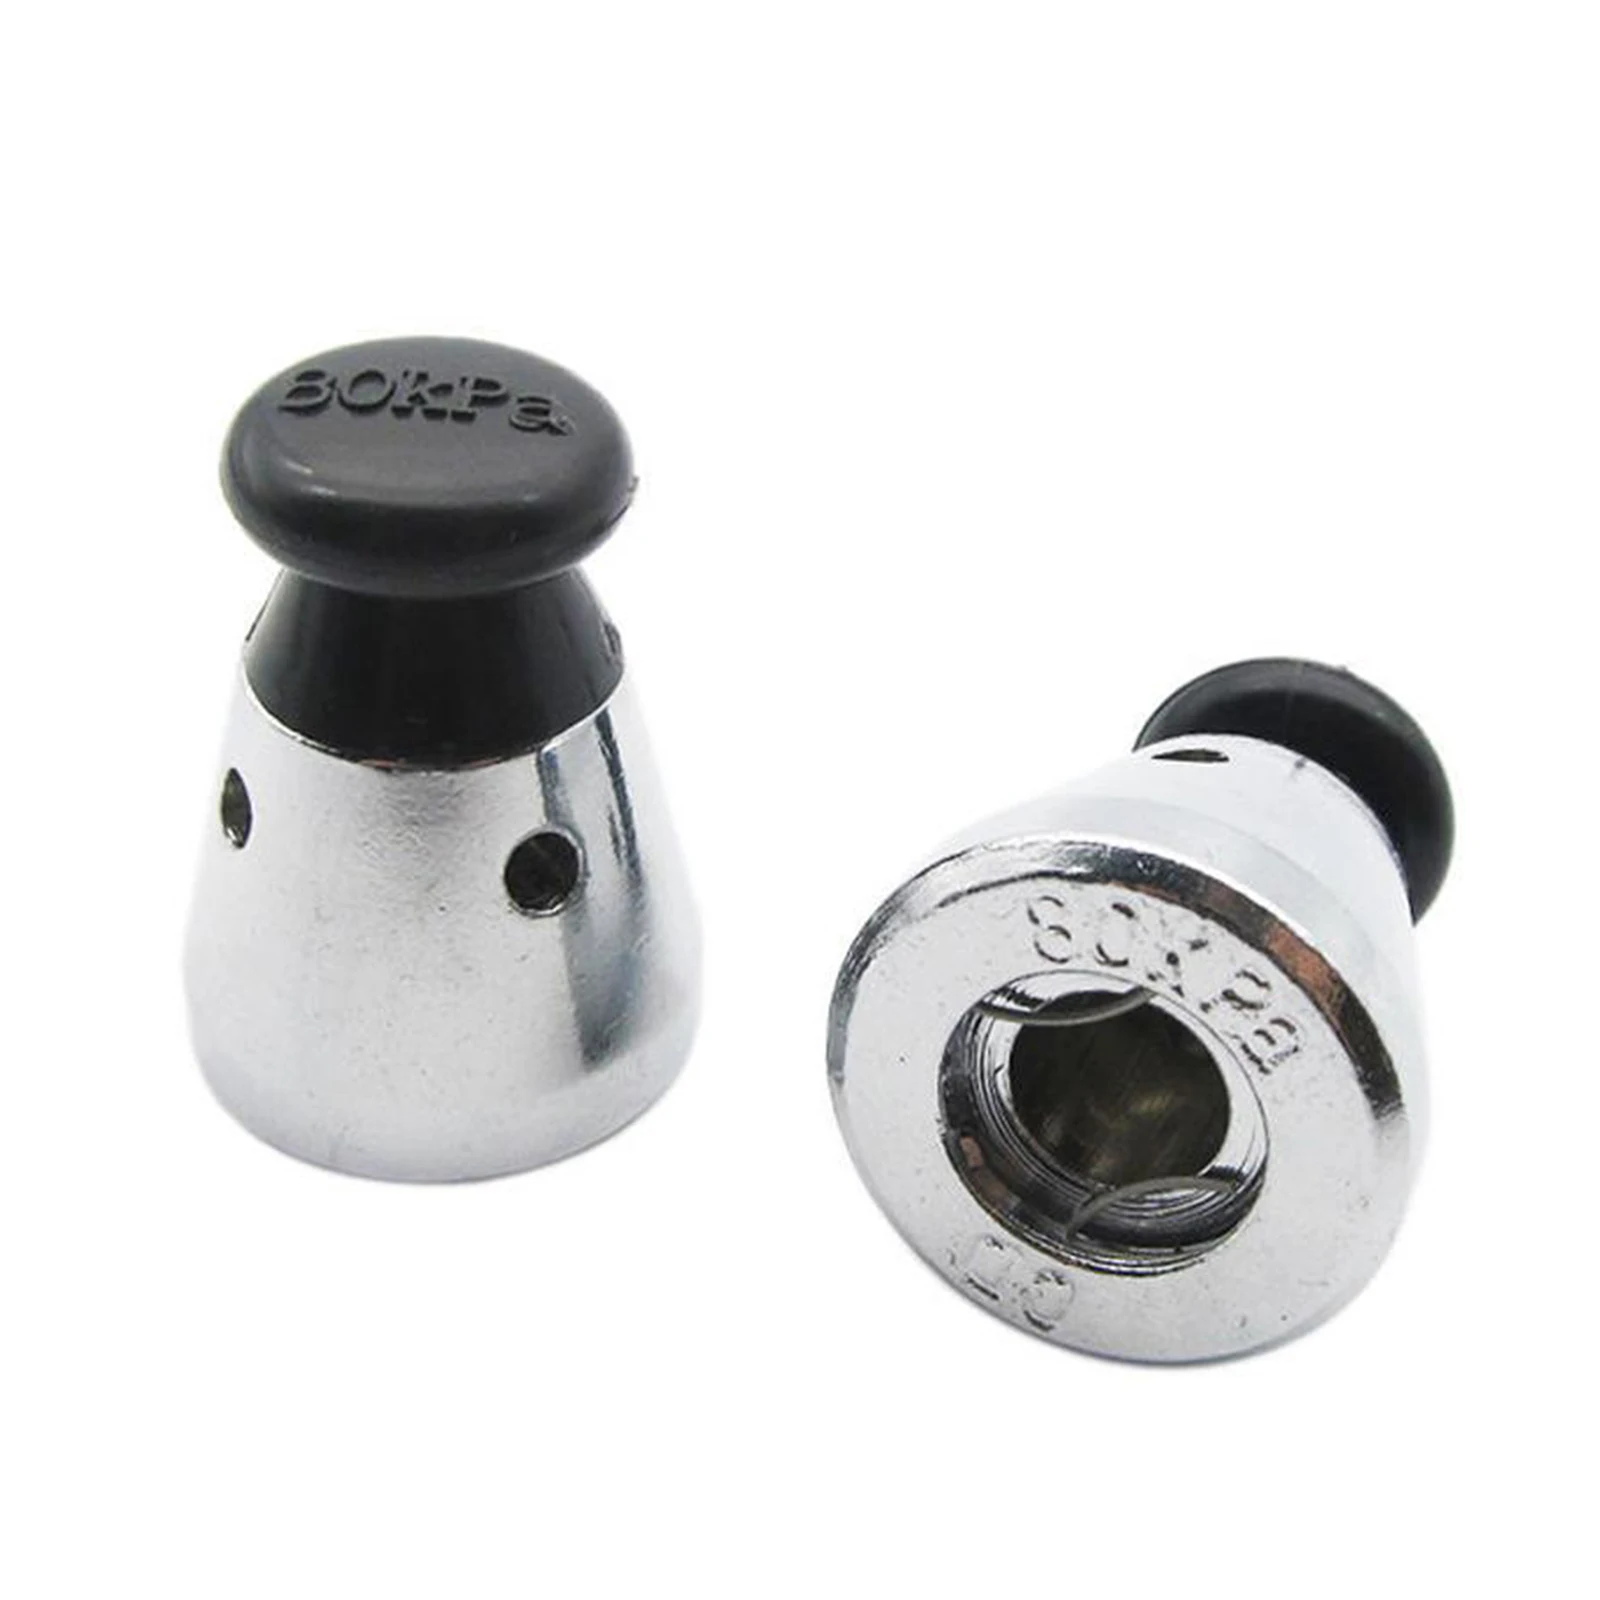 

Kitchen Pressure Cooker Valve Universal Pressure Valve Steam Release Accessory A Must-have Essential Accessory for Cooker THJ99